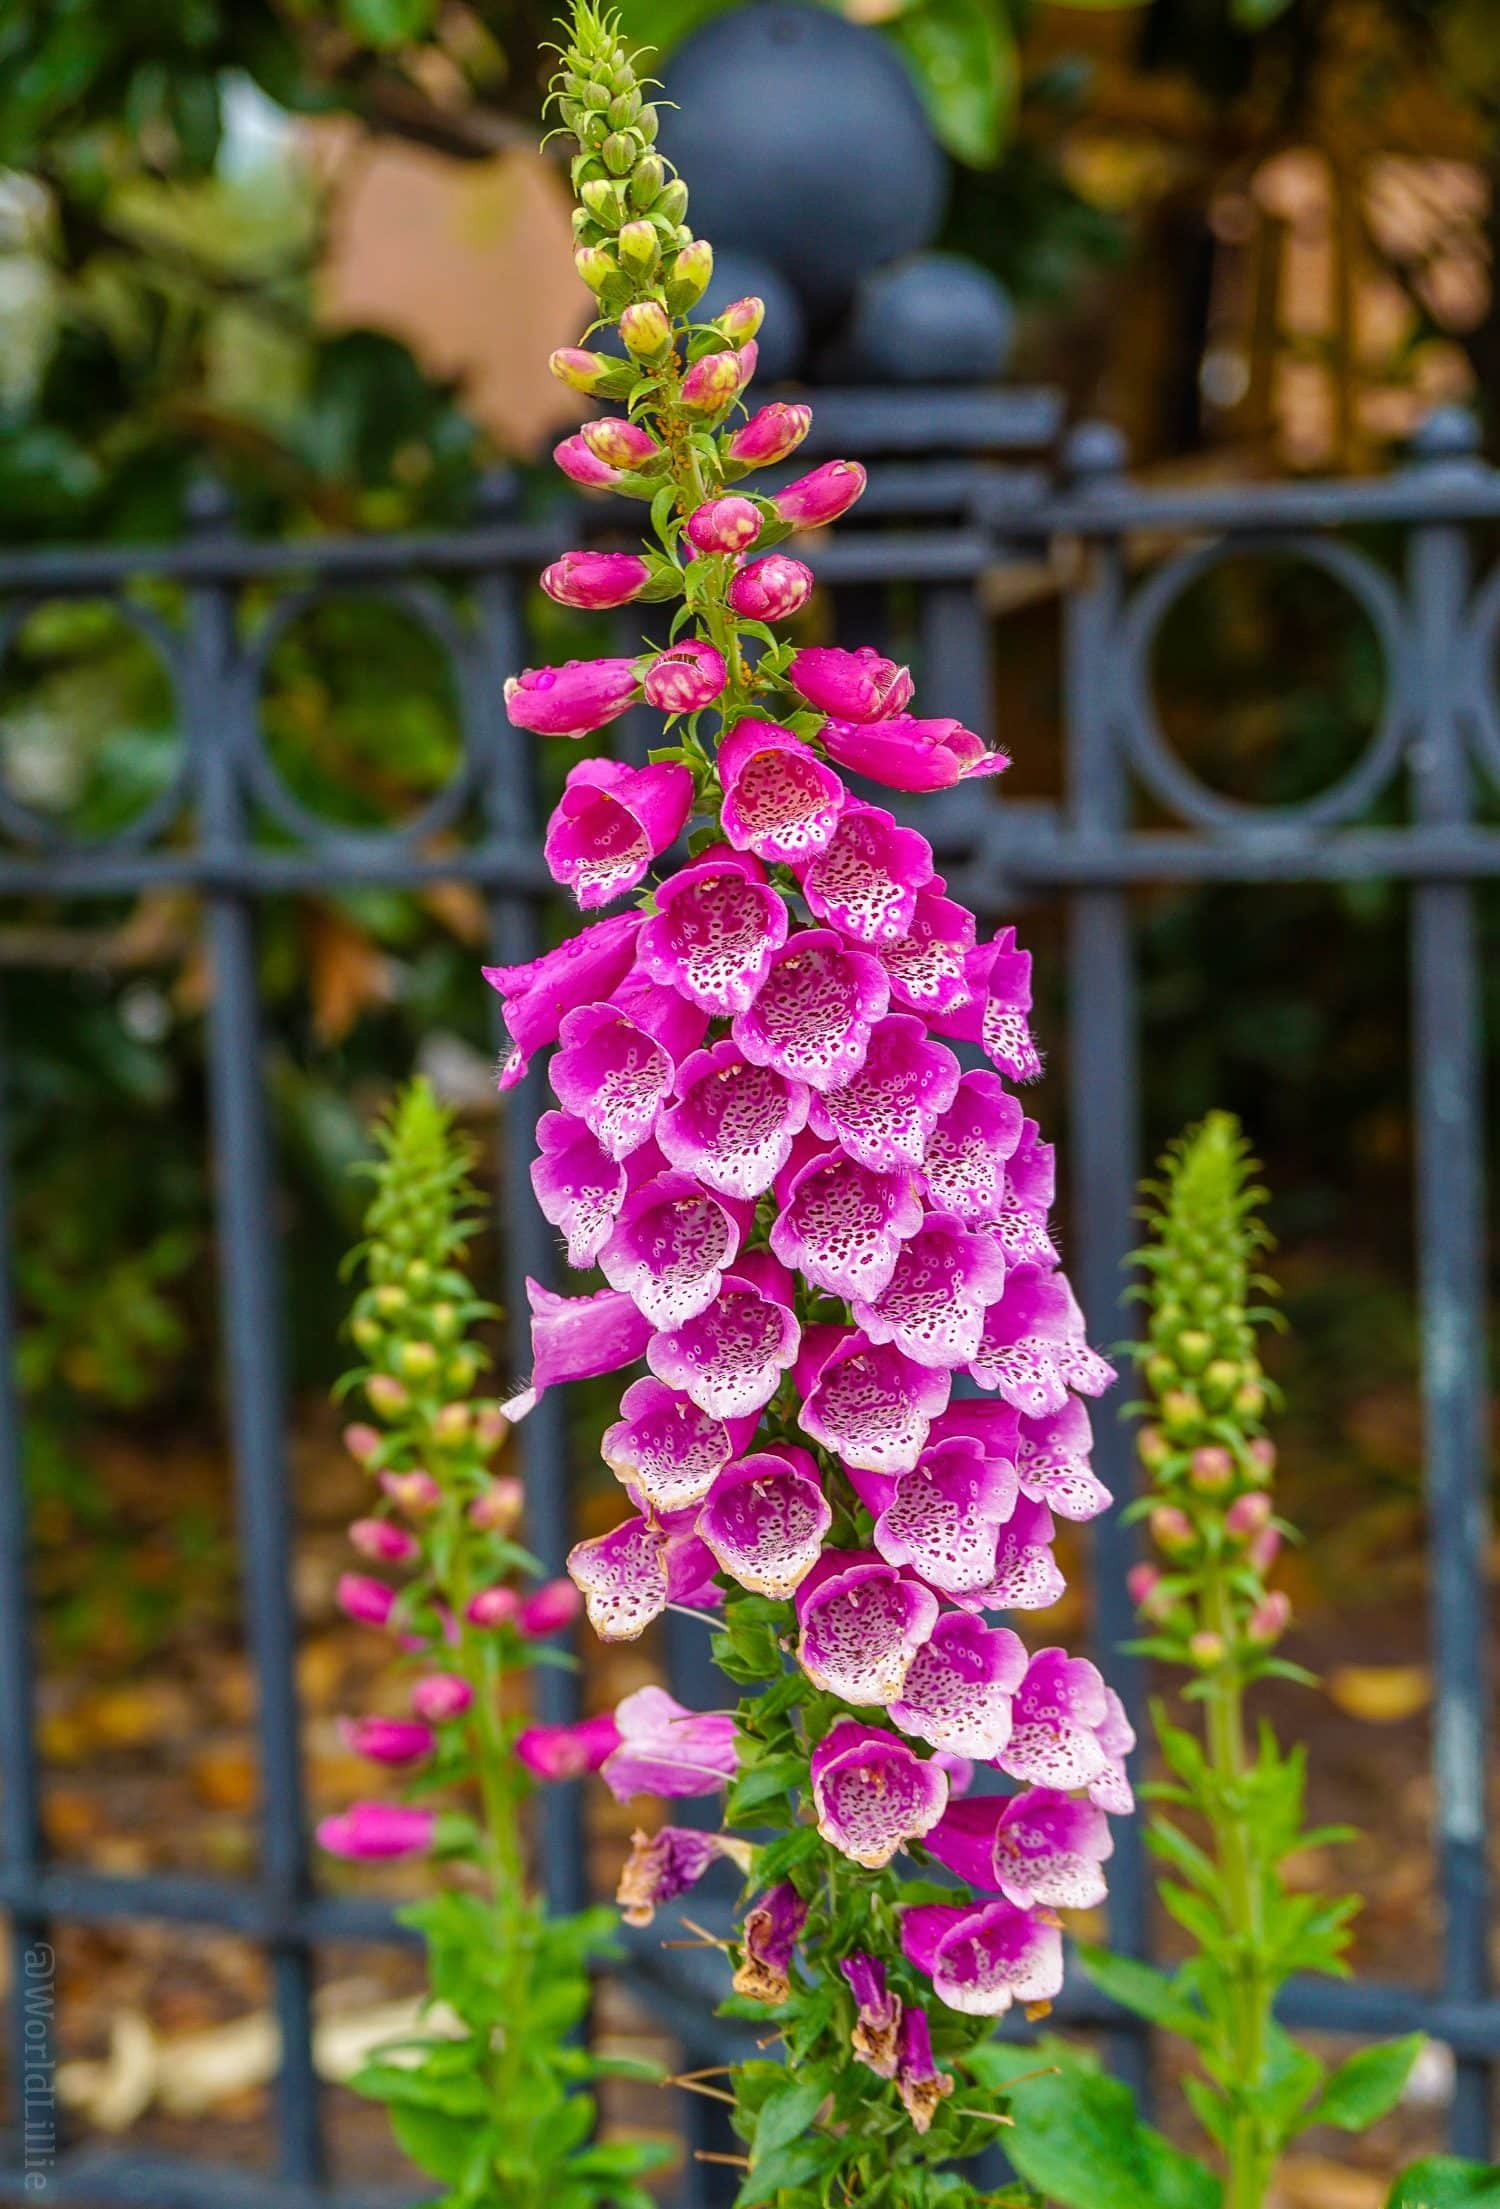 Charleston, SC was voted one of the best cities in the U.S. and in the world to travel to, as you can see from these beautiful photos of my South Carolina visit, full of flowers and great architecture! #Travel #CharlestonSC #Flowers #Architecture Bright bell-shaped flowers rang with happiness. 